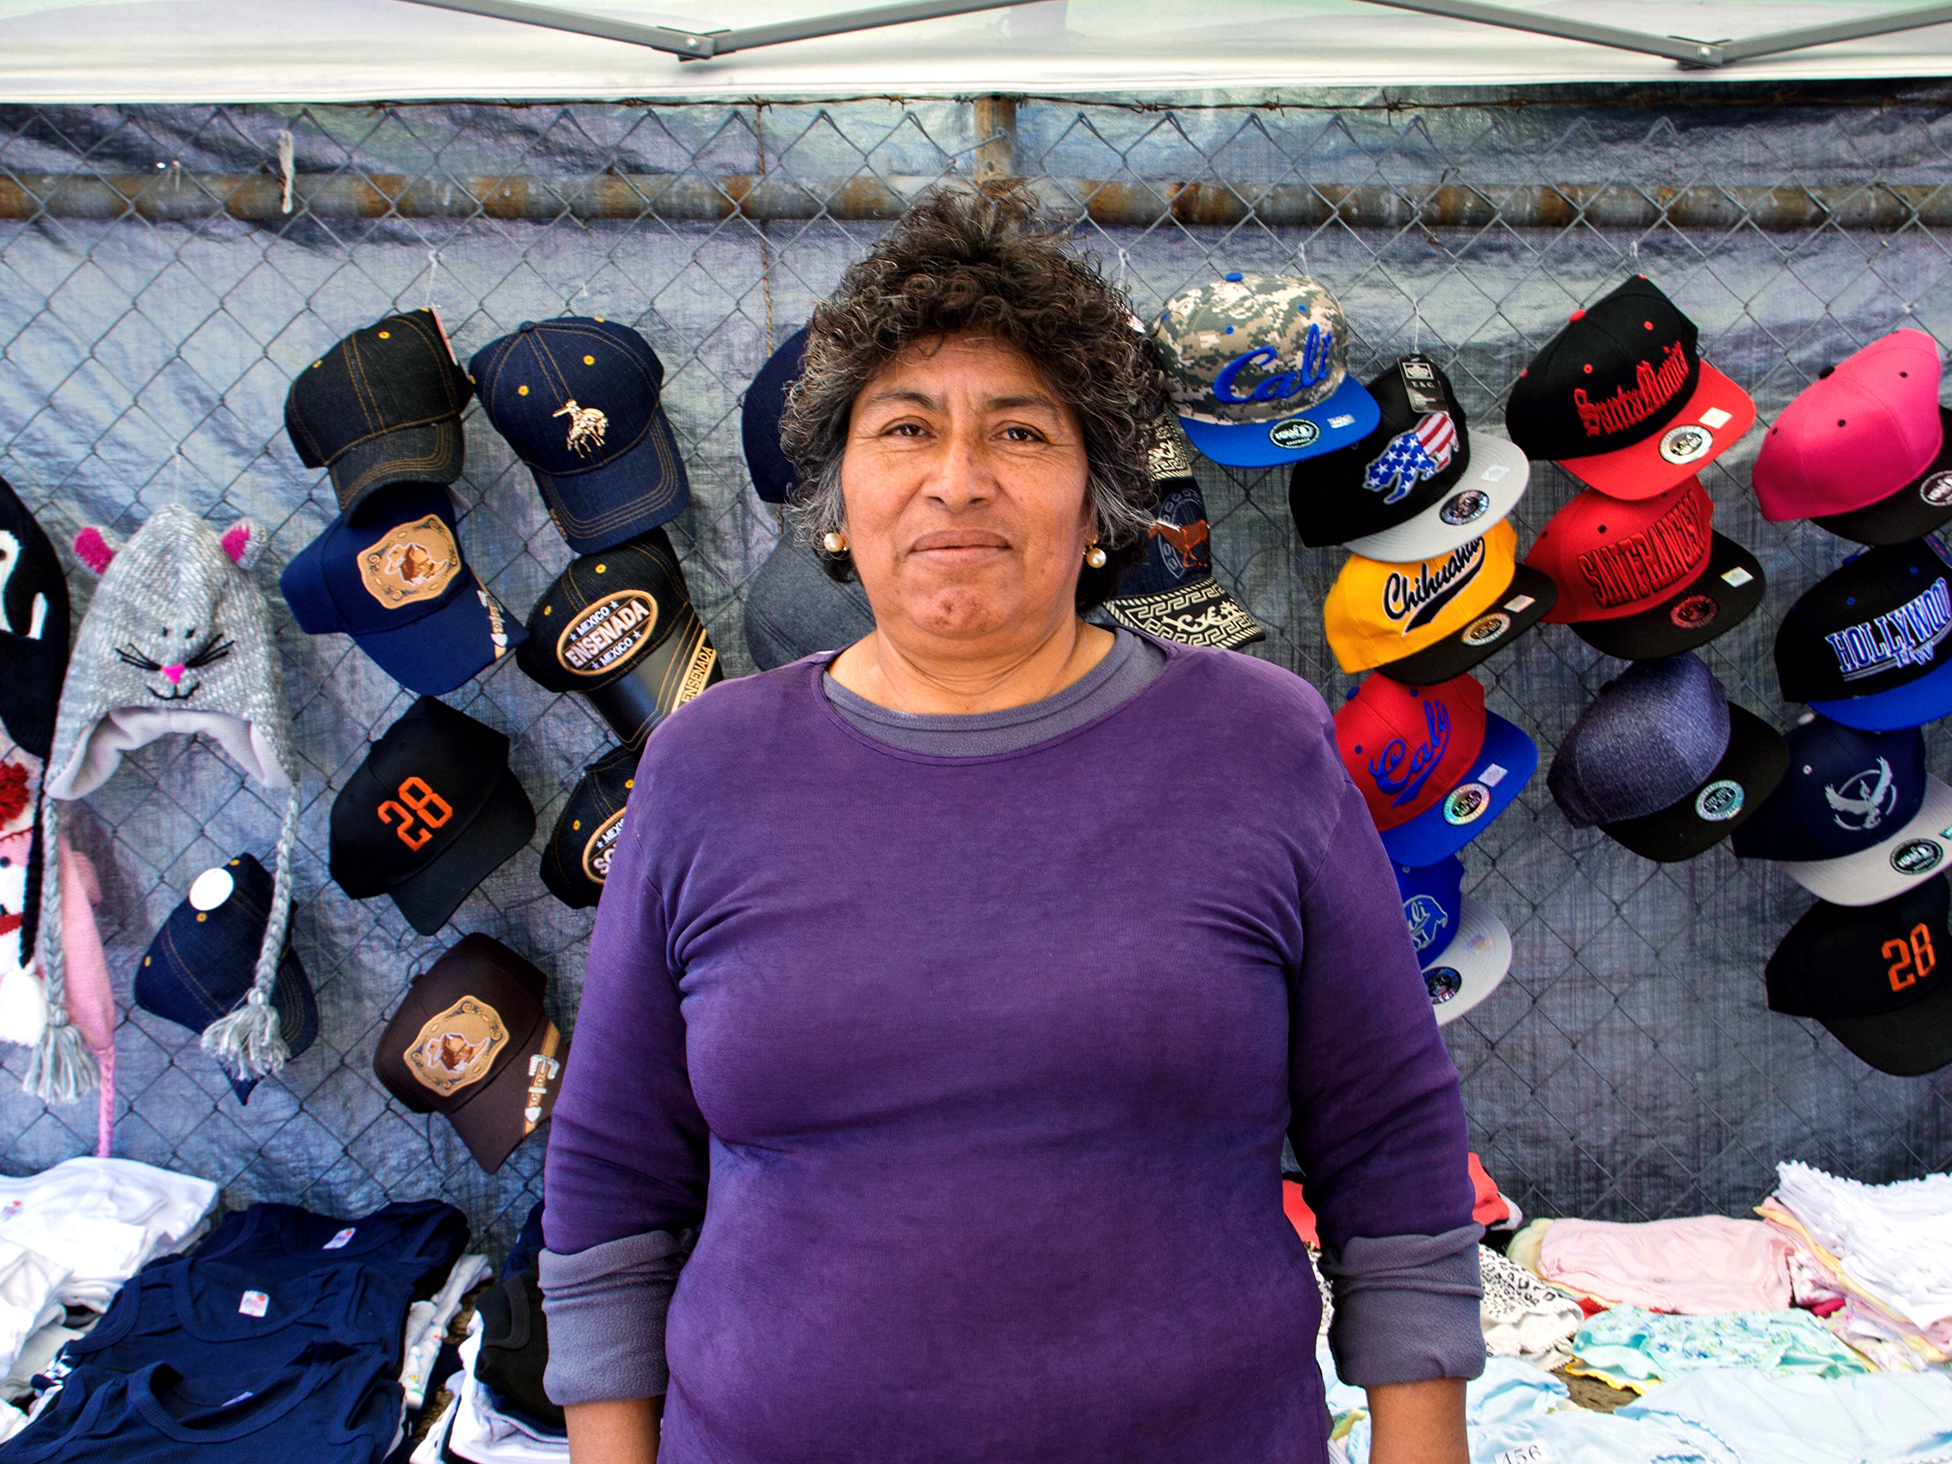 Merced is a vendor in the piñata district. She is worried that the city council's plan for a legal permitting system for sidewalk vendors, as proposed, will severely limit how many vendors can be on a given sidewalk, leaving many without a place to do business.